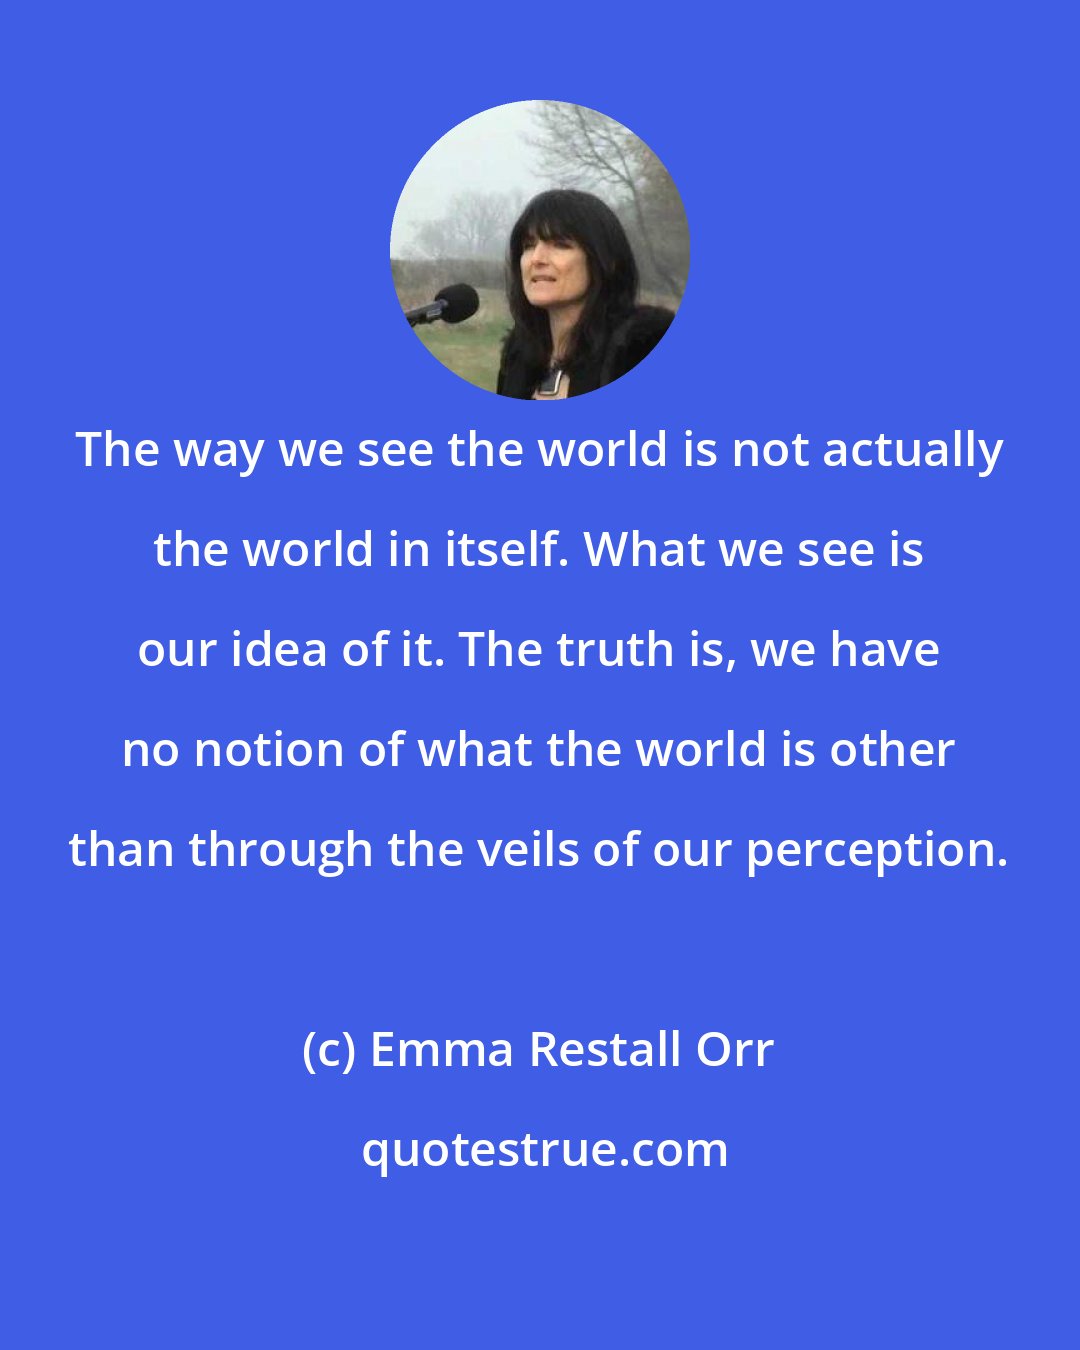 Emma Restall Orr: The way we see the world is not actually the world in itself. What we see is our idea of it. The truth is, we have no notion of what the world is other than through the veils of our perception.